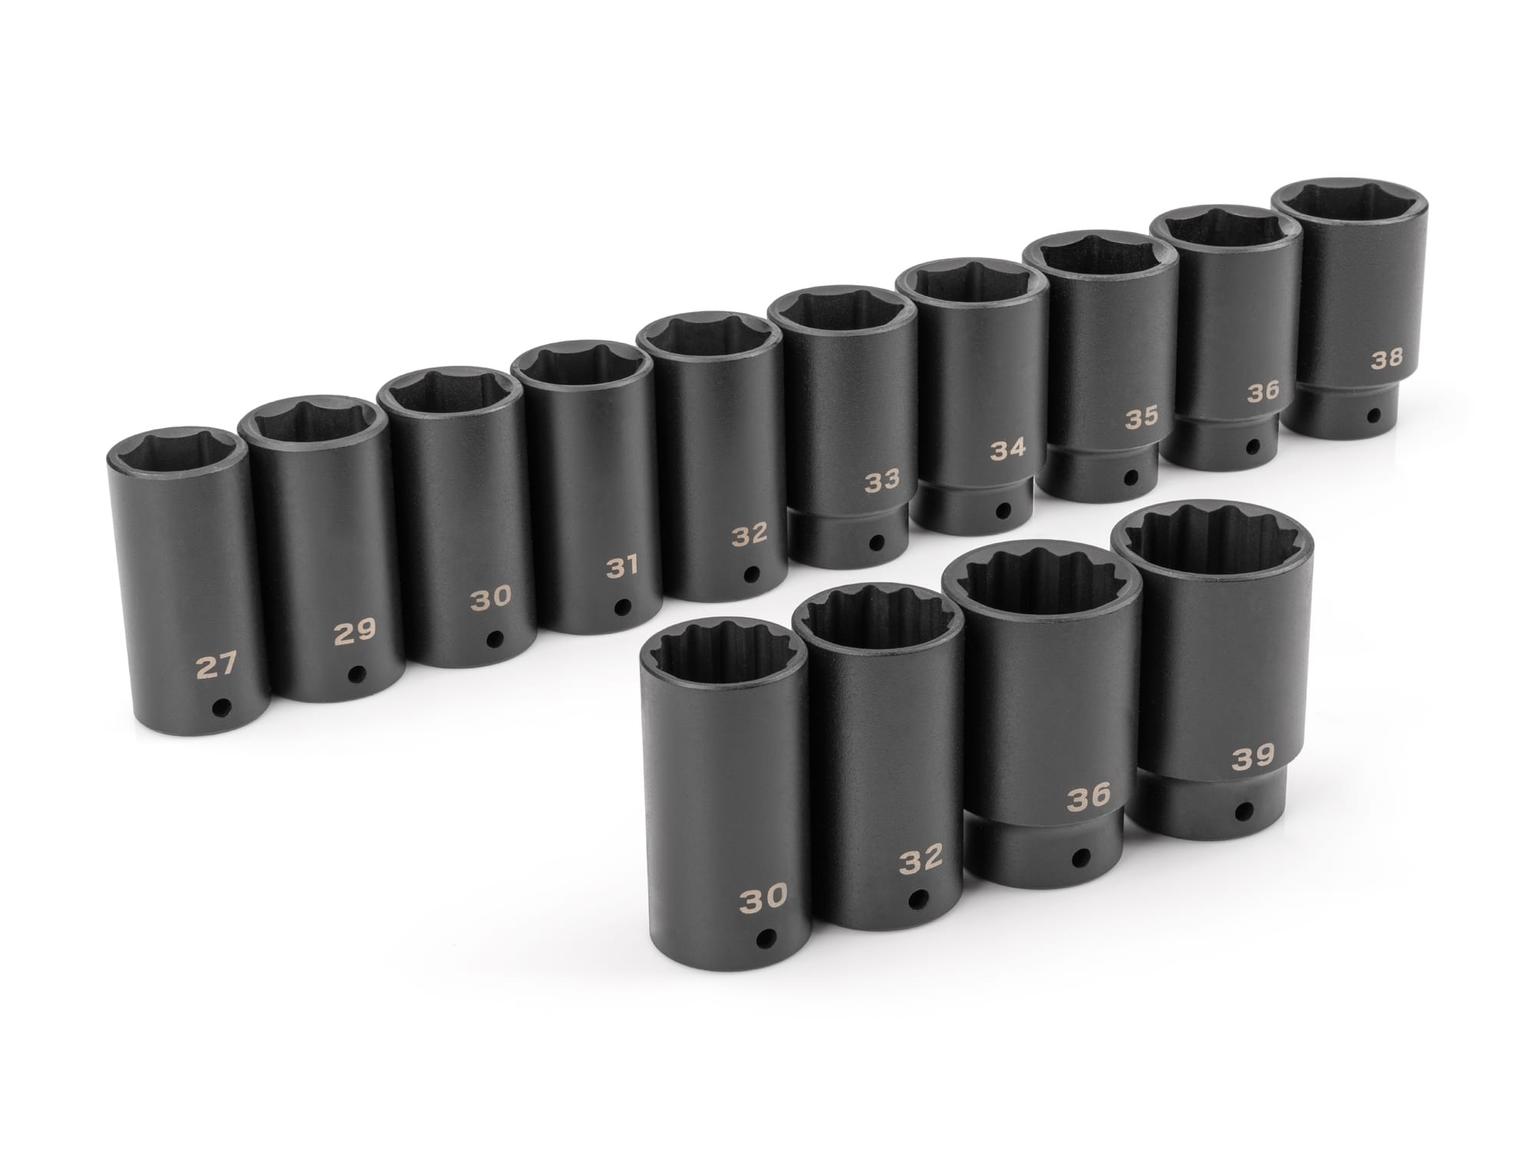 TEKTON SID92002-T 1/2 Inch Drive Deep 6-Point and 12-Point Axle Nut Impact Socket Set, 14-Piece (27-39 mm)